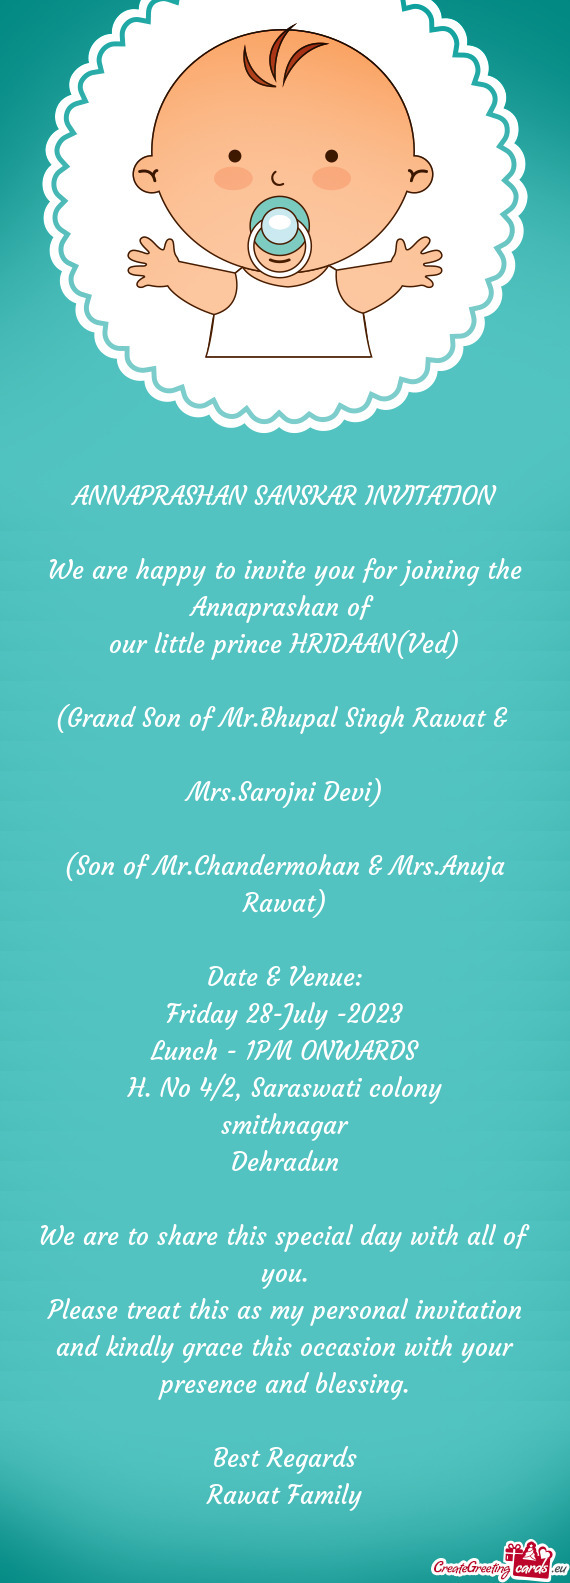 We are happy to invite you for joining the Annaprashan of